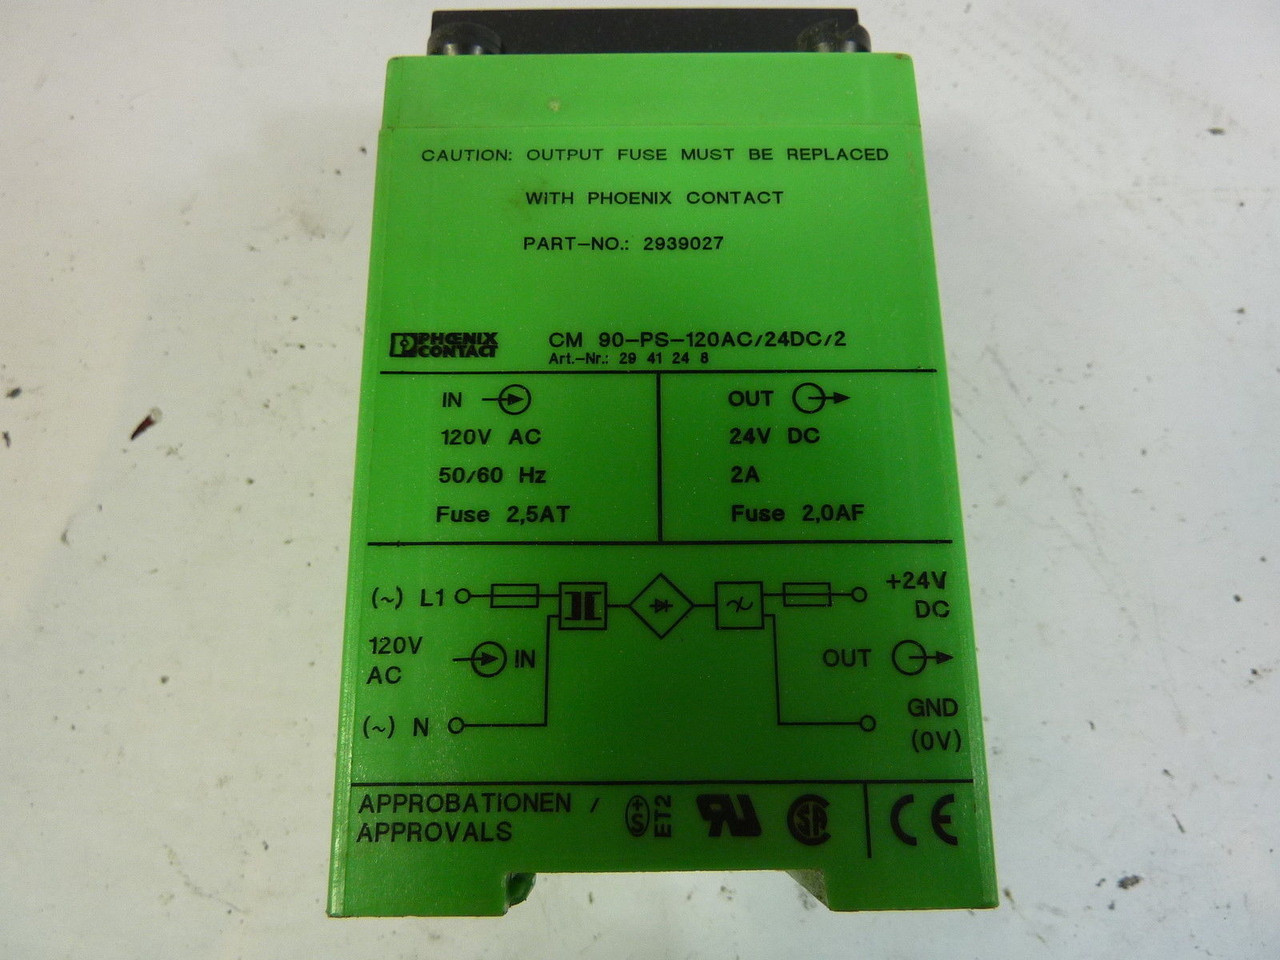 Phoenix Contact CM90-PS-120AC/24DC/2 Power Supply USED